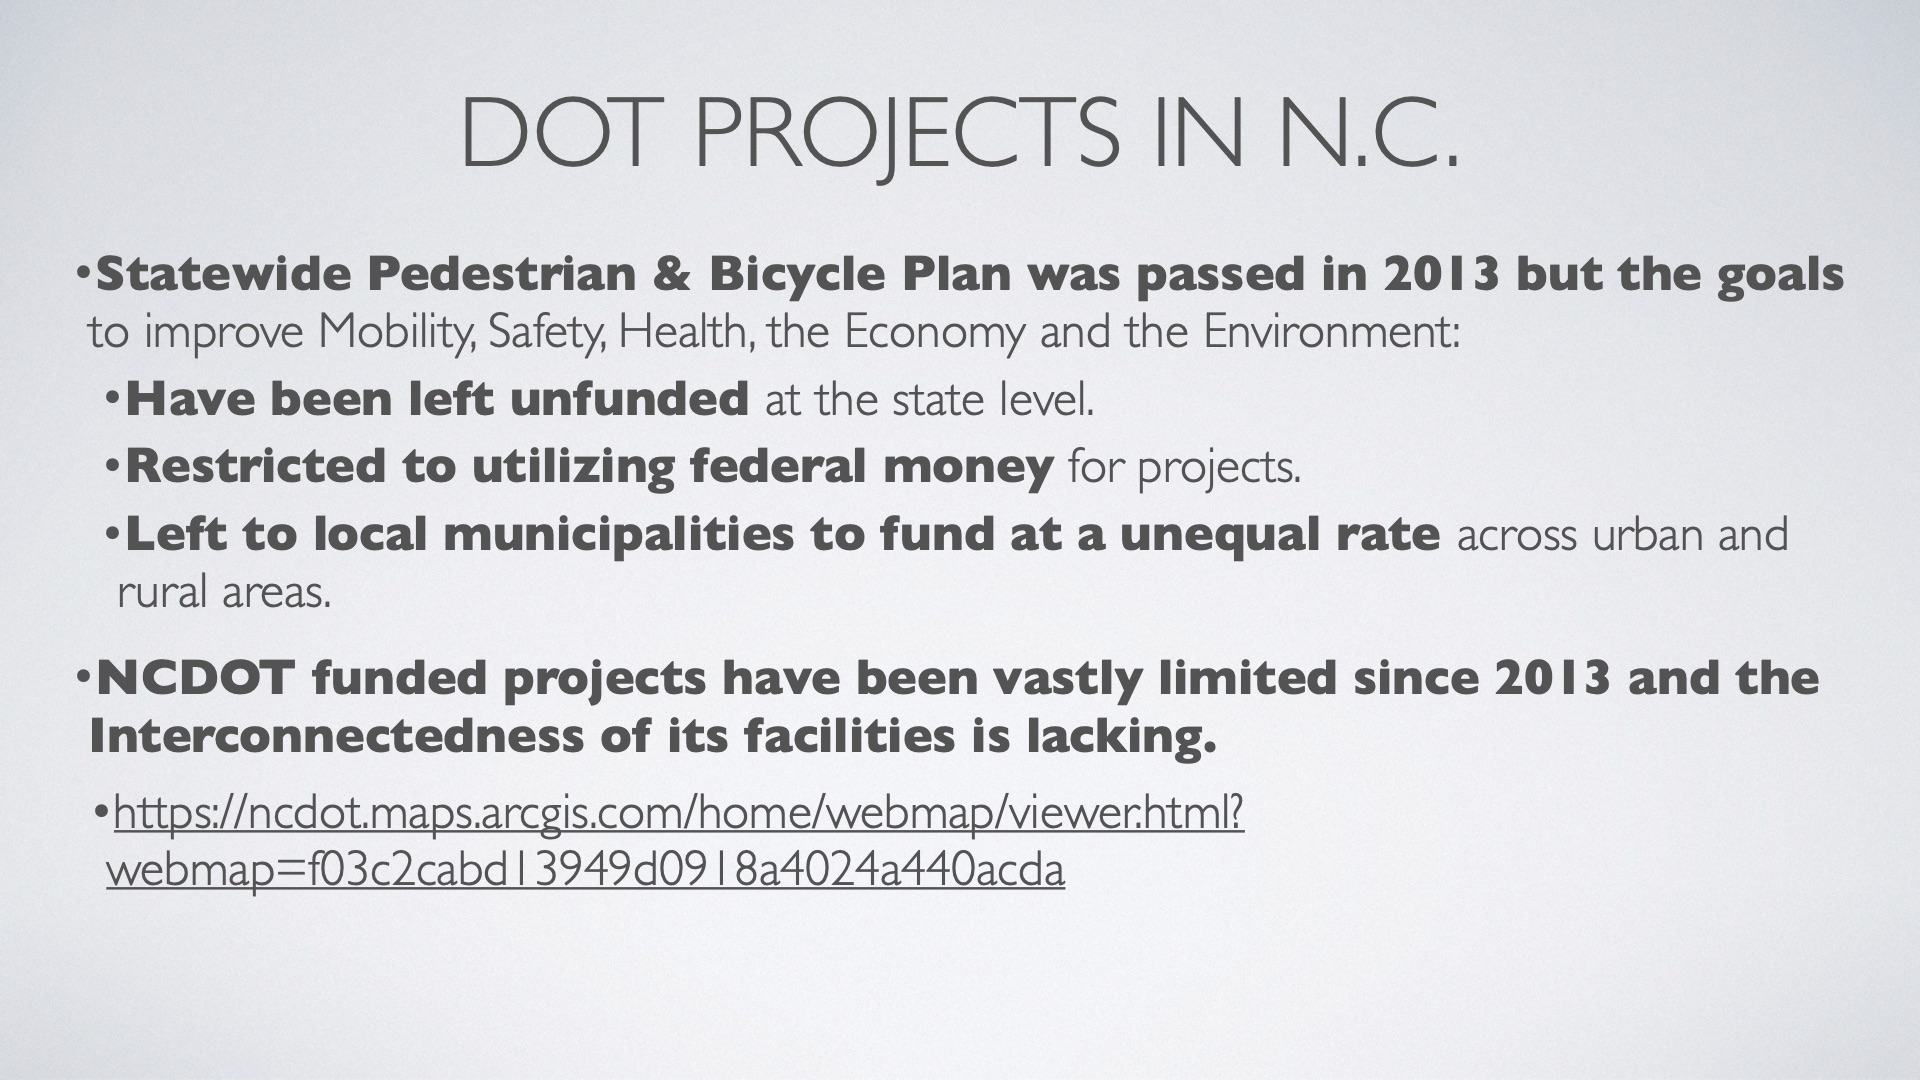 NCDOT Presentation - Electric Bicycles in NC